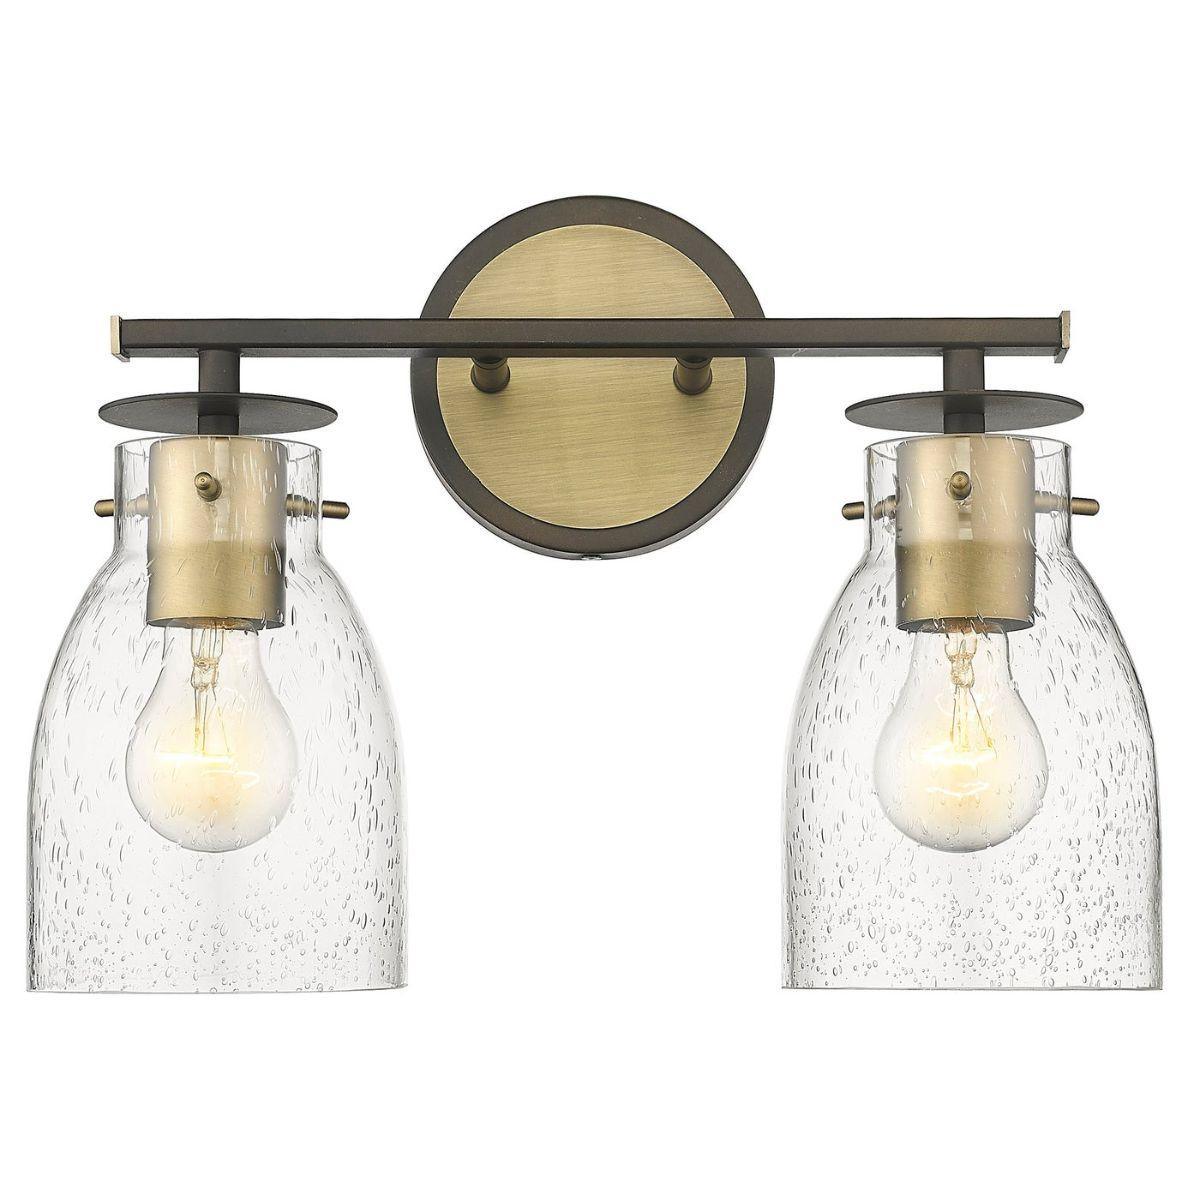 Shelby 15 in. 2 Lights Vanity Light Oil Rubbed Bronze & Antique Brass Finish